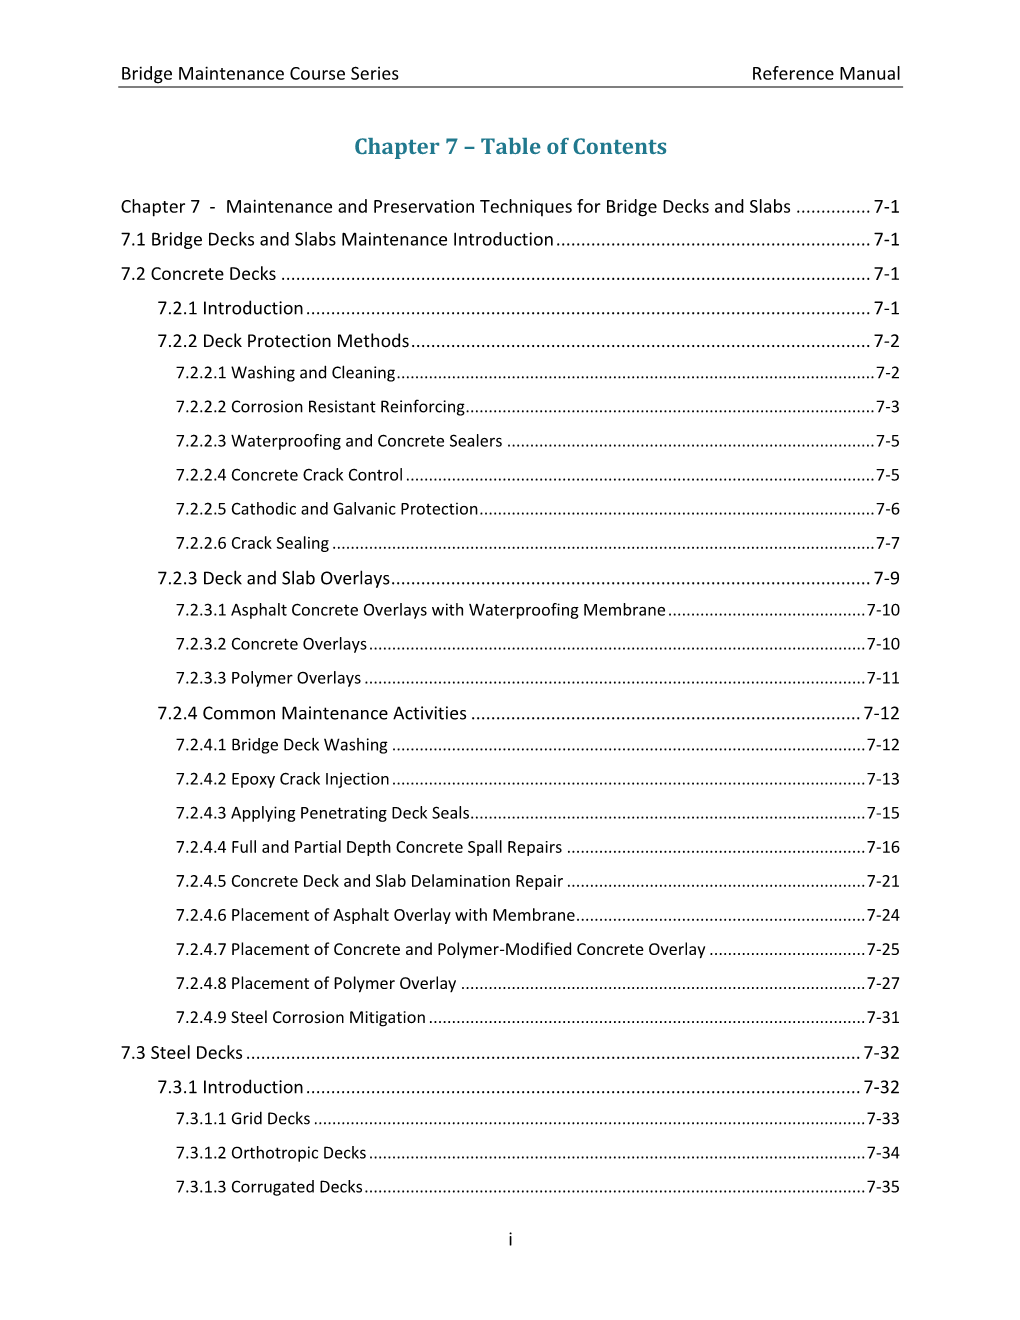 Chapter 7 – Table of Contents